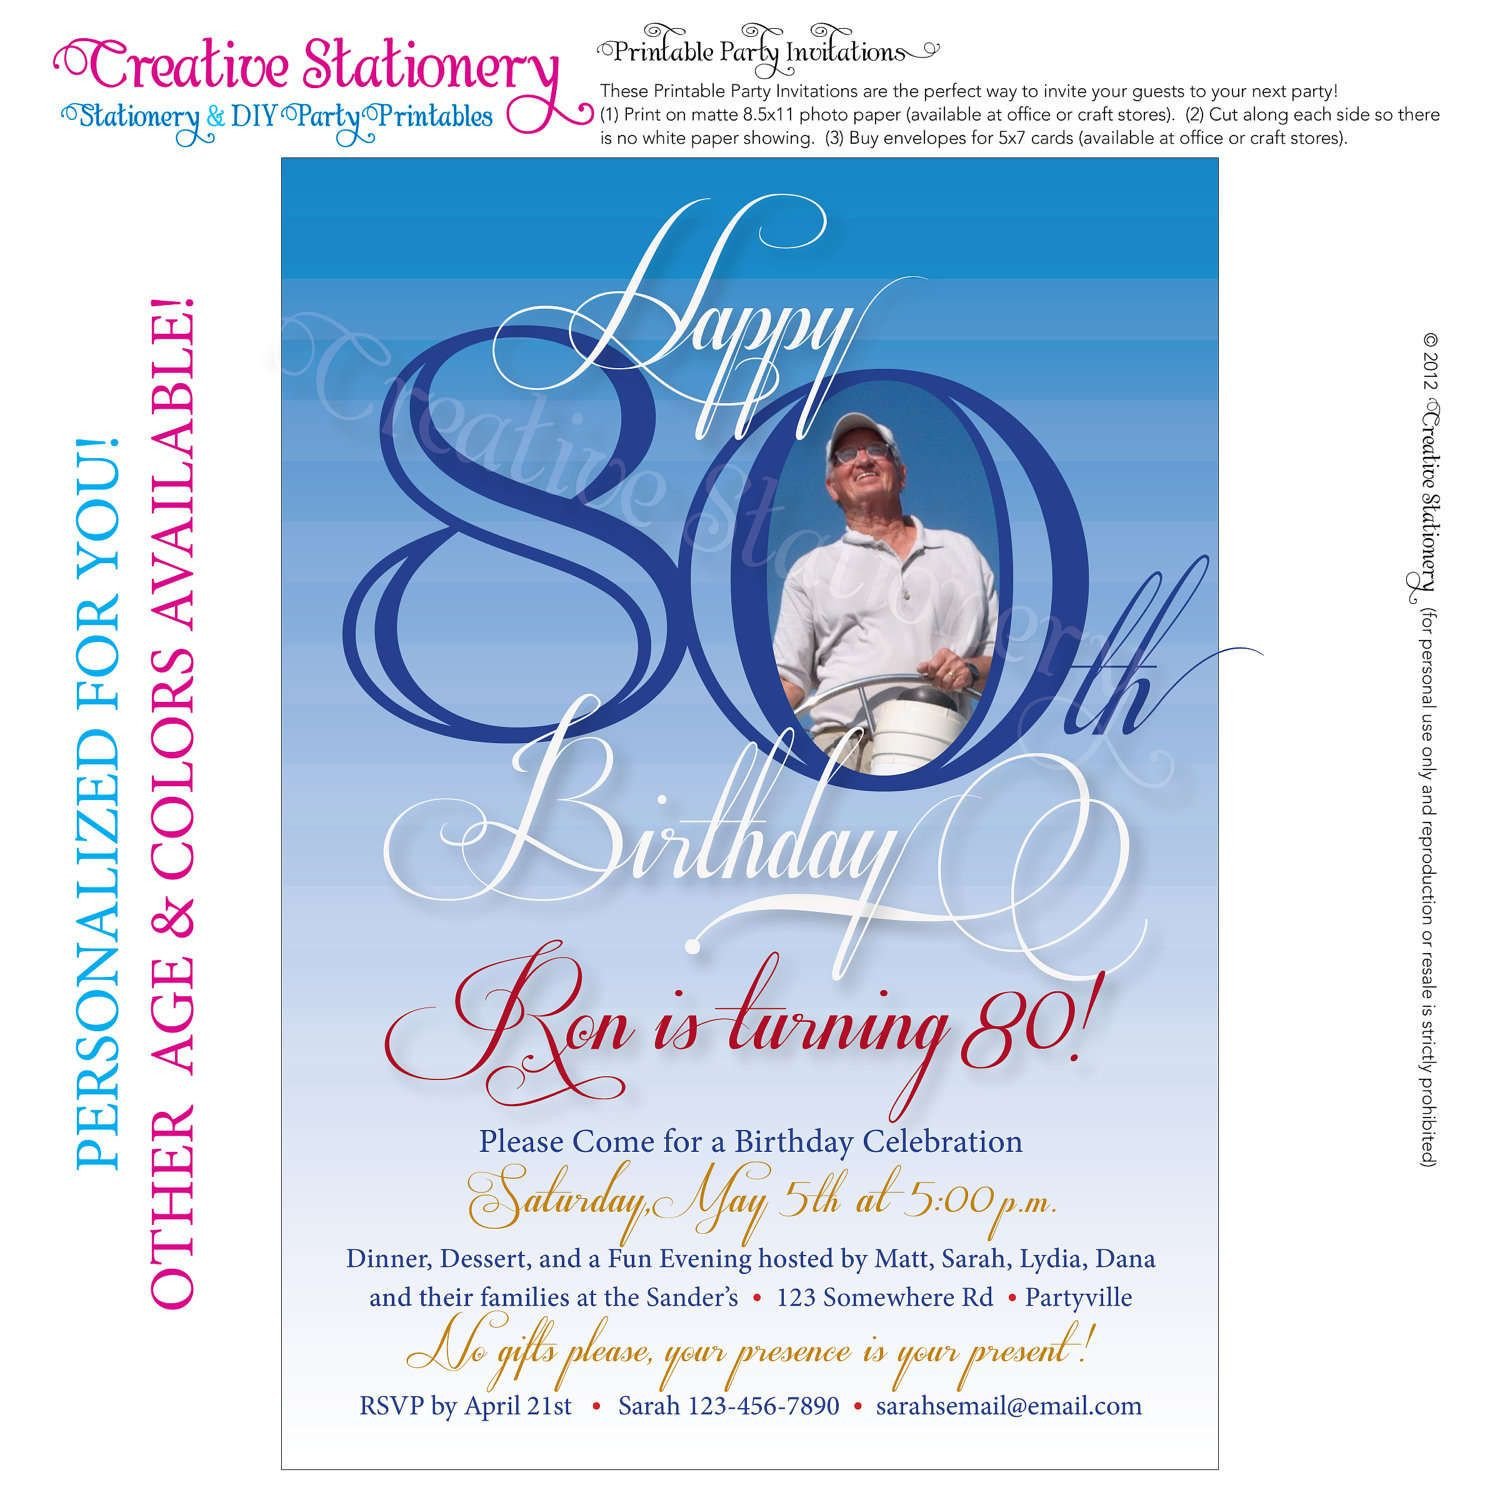 Free Printable Invitations For 80th Birthday Party